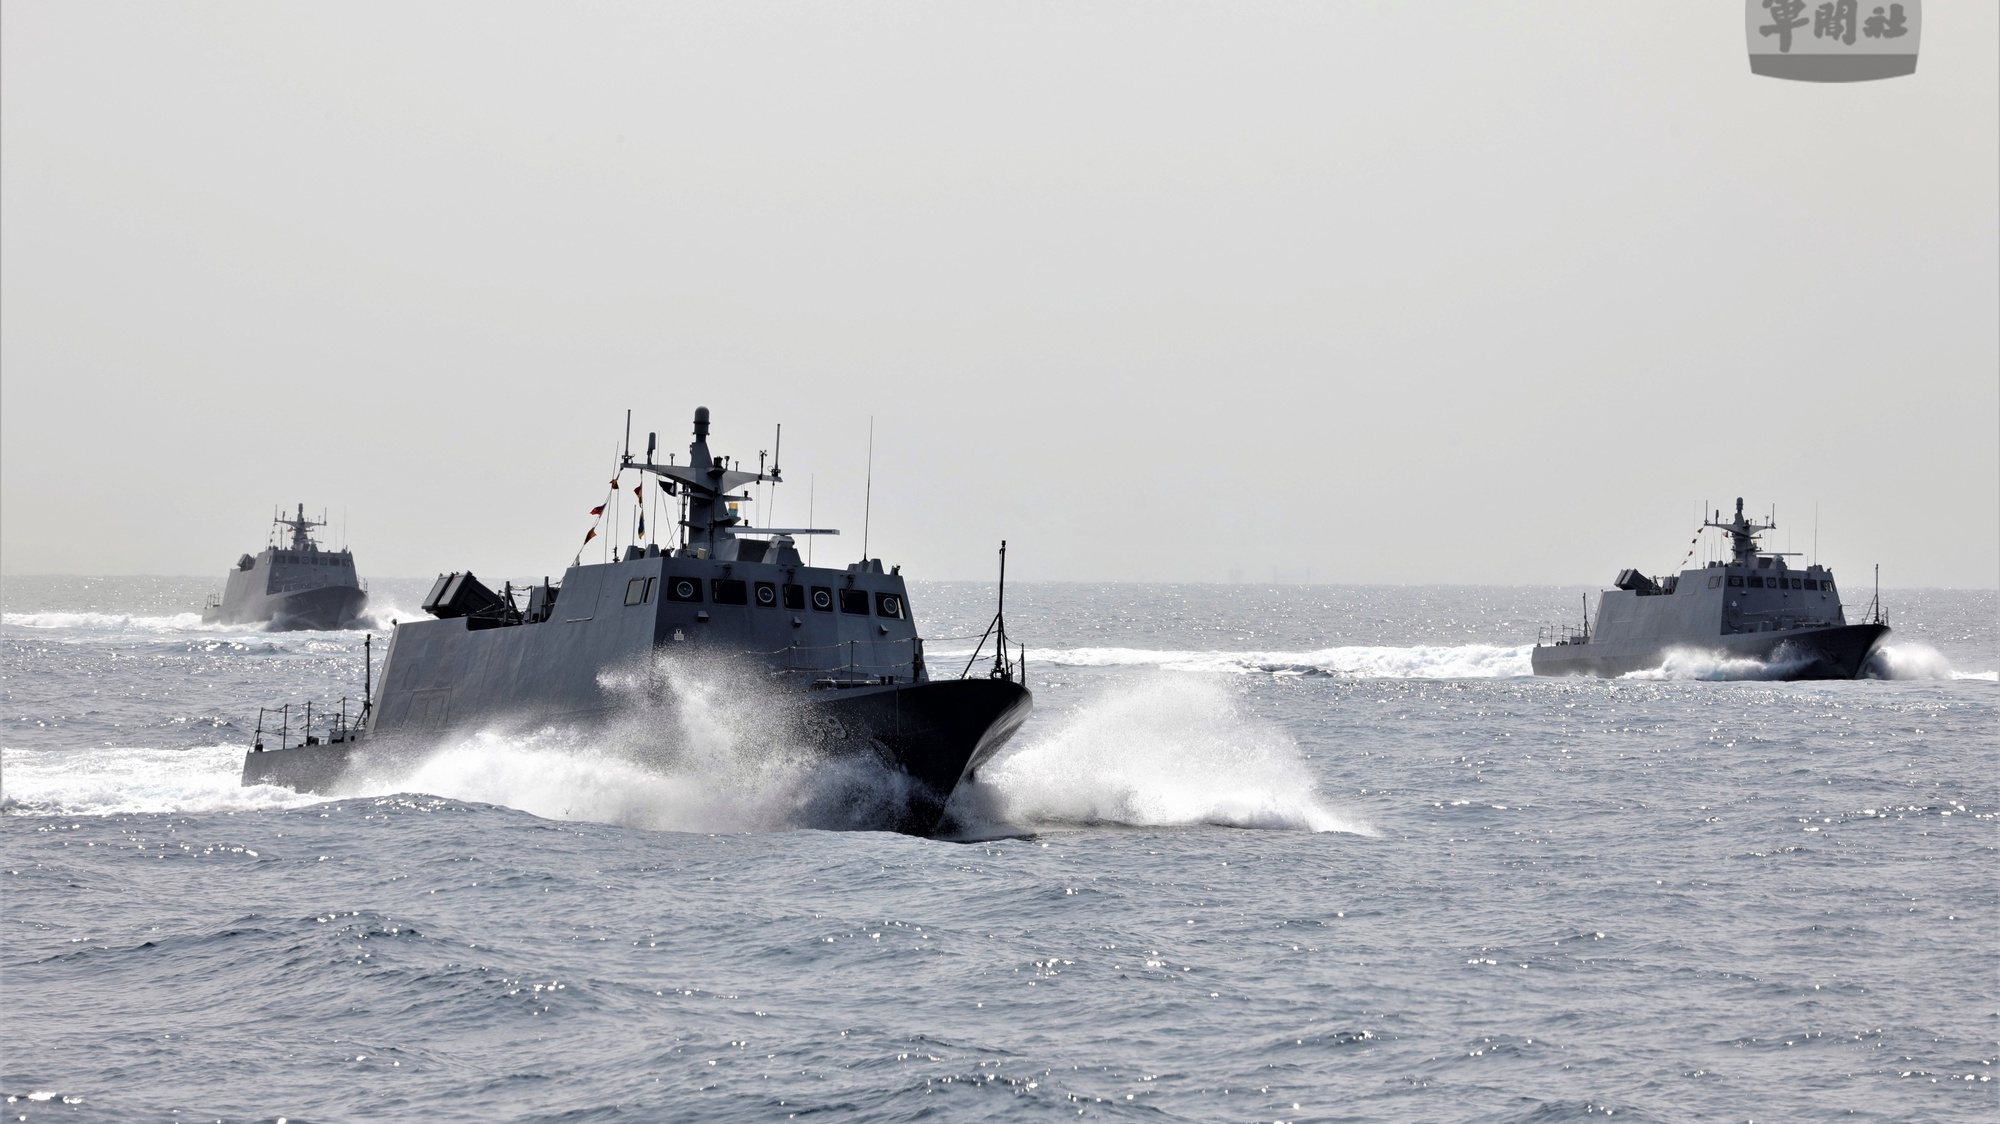 epa10567155 A handout photo provided by the Taiwan Ministry of National Defense shows Taiwan Navy vessels FACG (Fast Attack Craft, Guided missile) sail at an undisclosed location, 10 April 2023. The People&#039;s Liberation Army (PLA) is holding a military exercise in the Fujian Province, Pingtan County, the closest point to Taiwan after China announced three days of military drills around Taiwan on 09 April.  EPA/HOTLI SIMANJUNTAK HANDOUT -- MANDATORY CREDIT -- the watermark may not be removed/cropped -- HANDOUT EDITORIAL USE ONLY/NO SALES